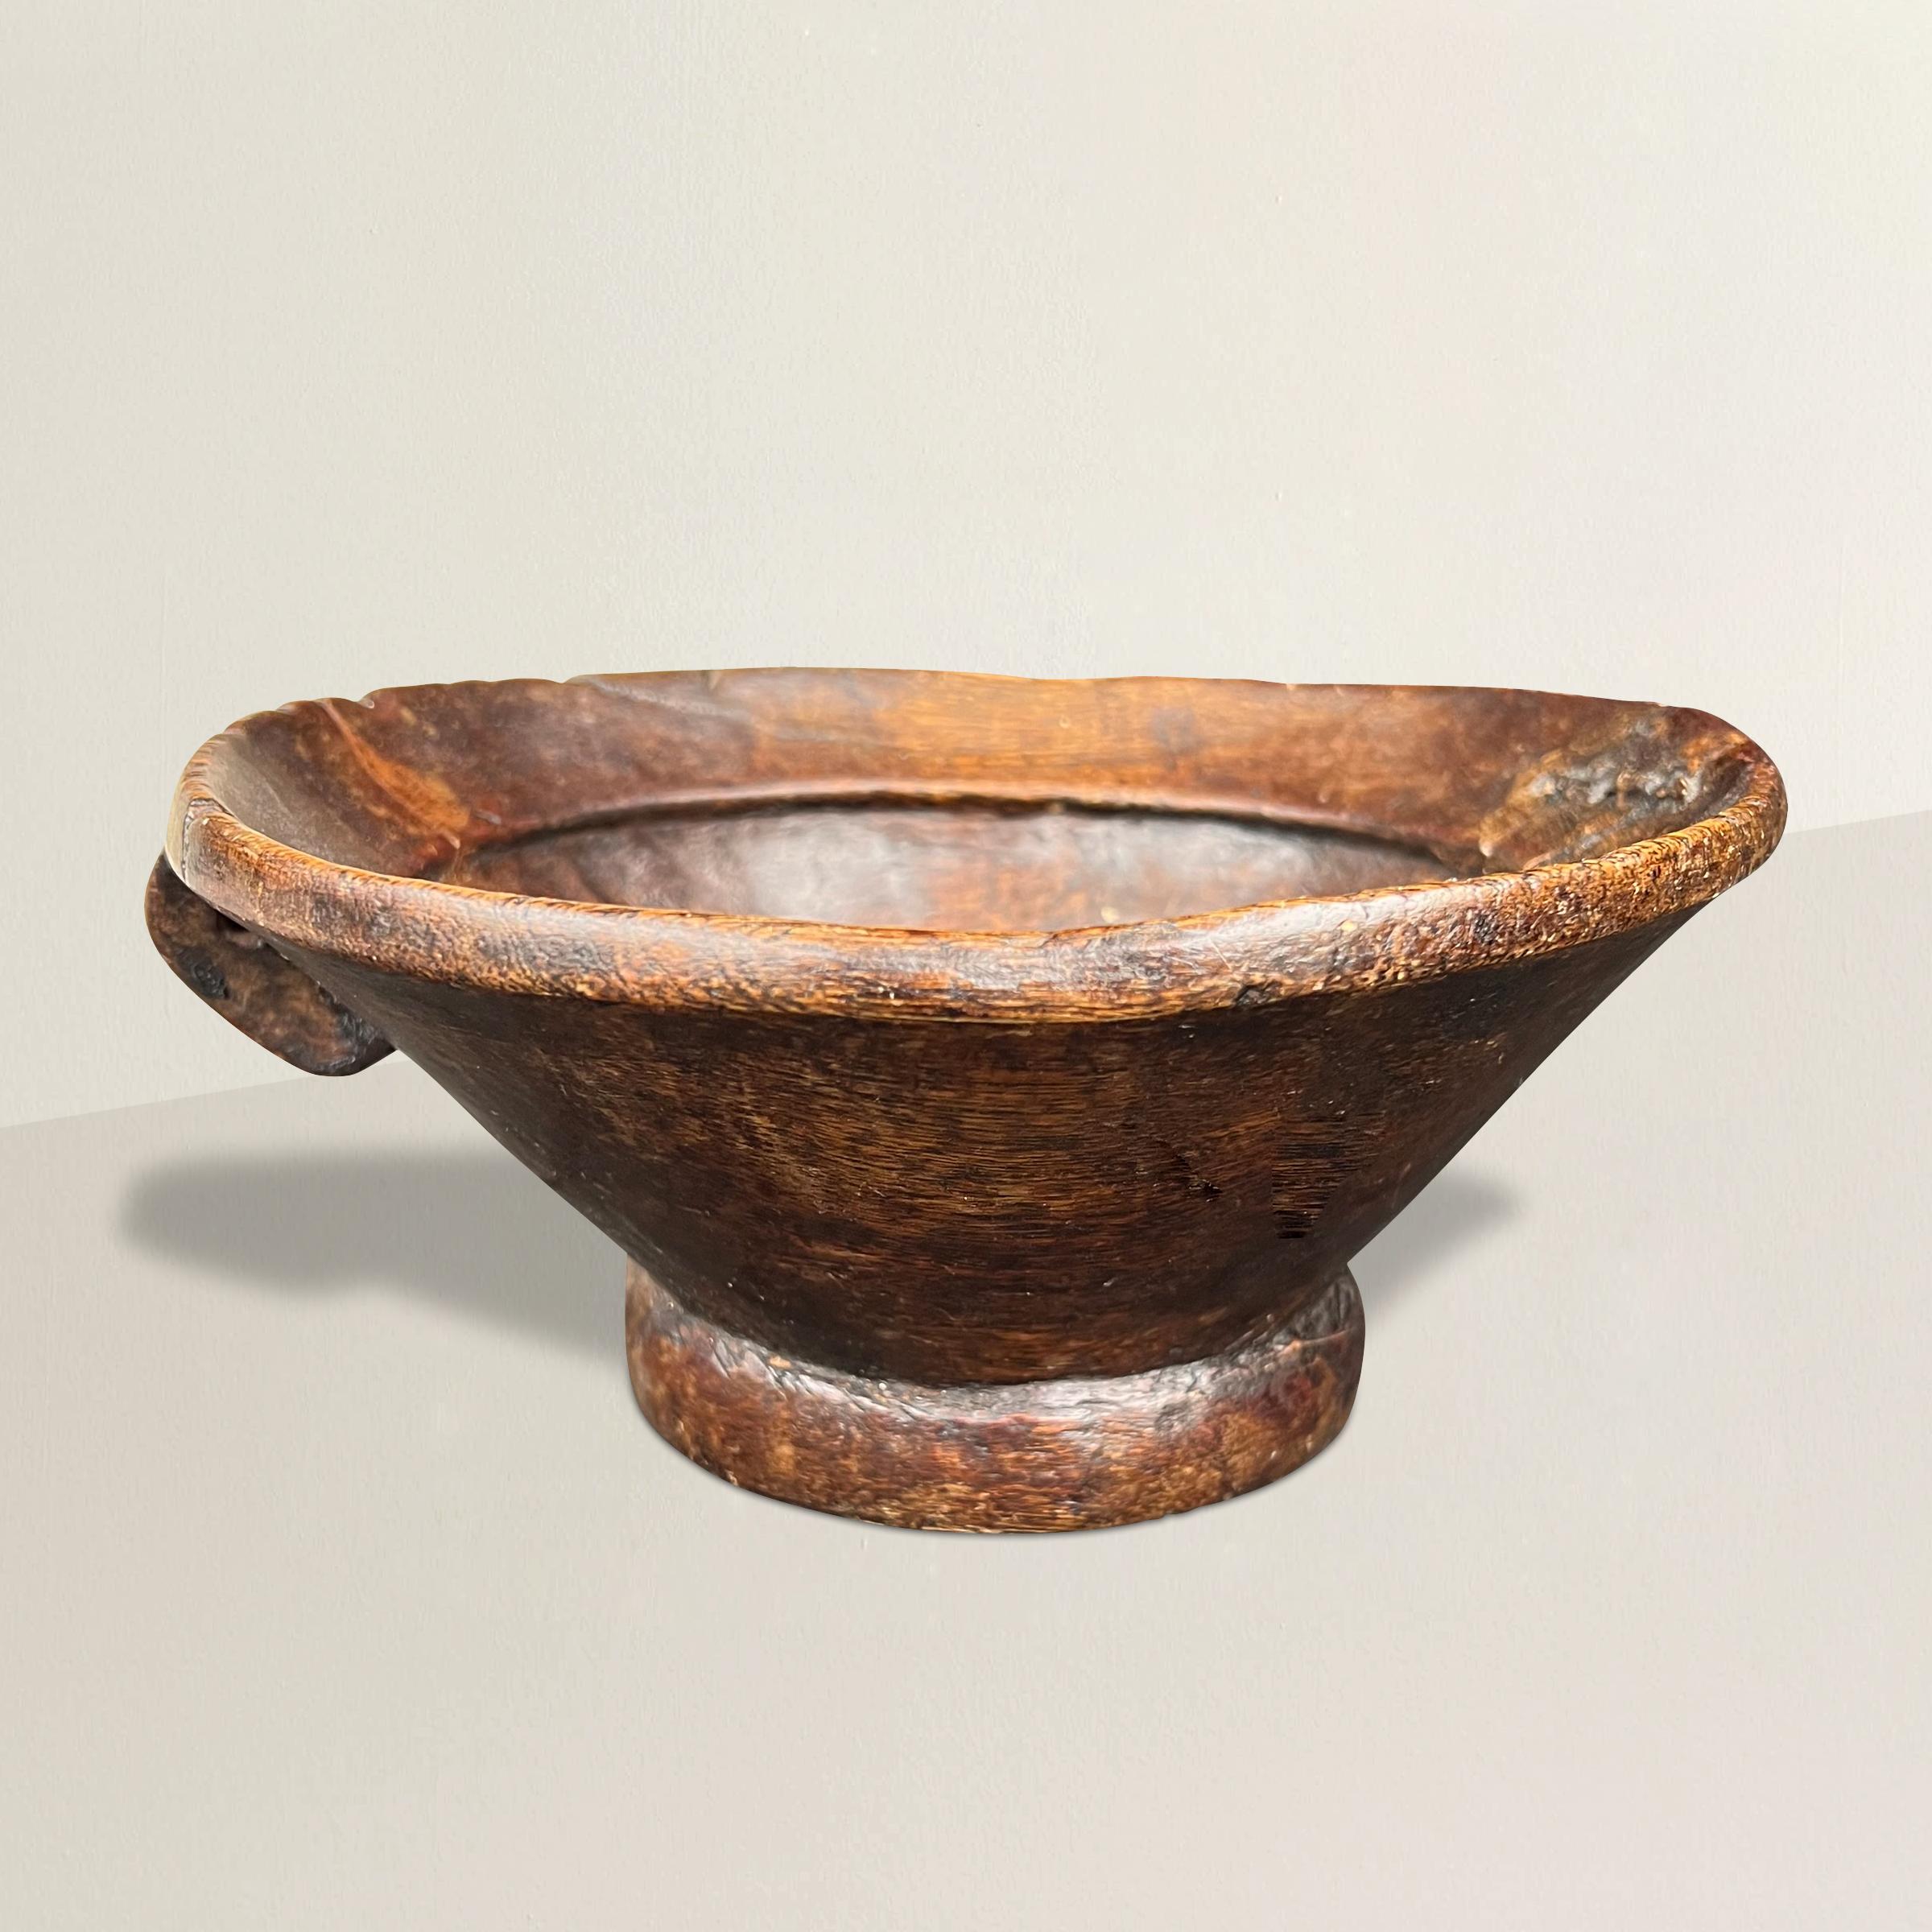 Embrace the rustic charm and storied history of this hand-carved primitive wood bowl. Crafted with care by skilled artisans of the past, its weathered appearance bears witness to a life well-lived. The most intriguing feature is the sturdy metal